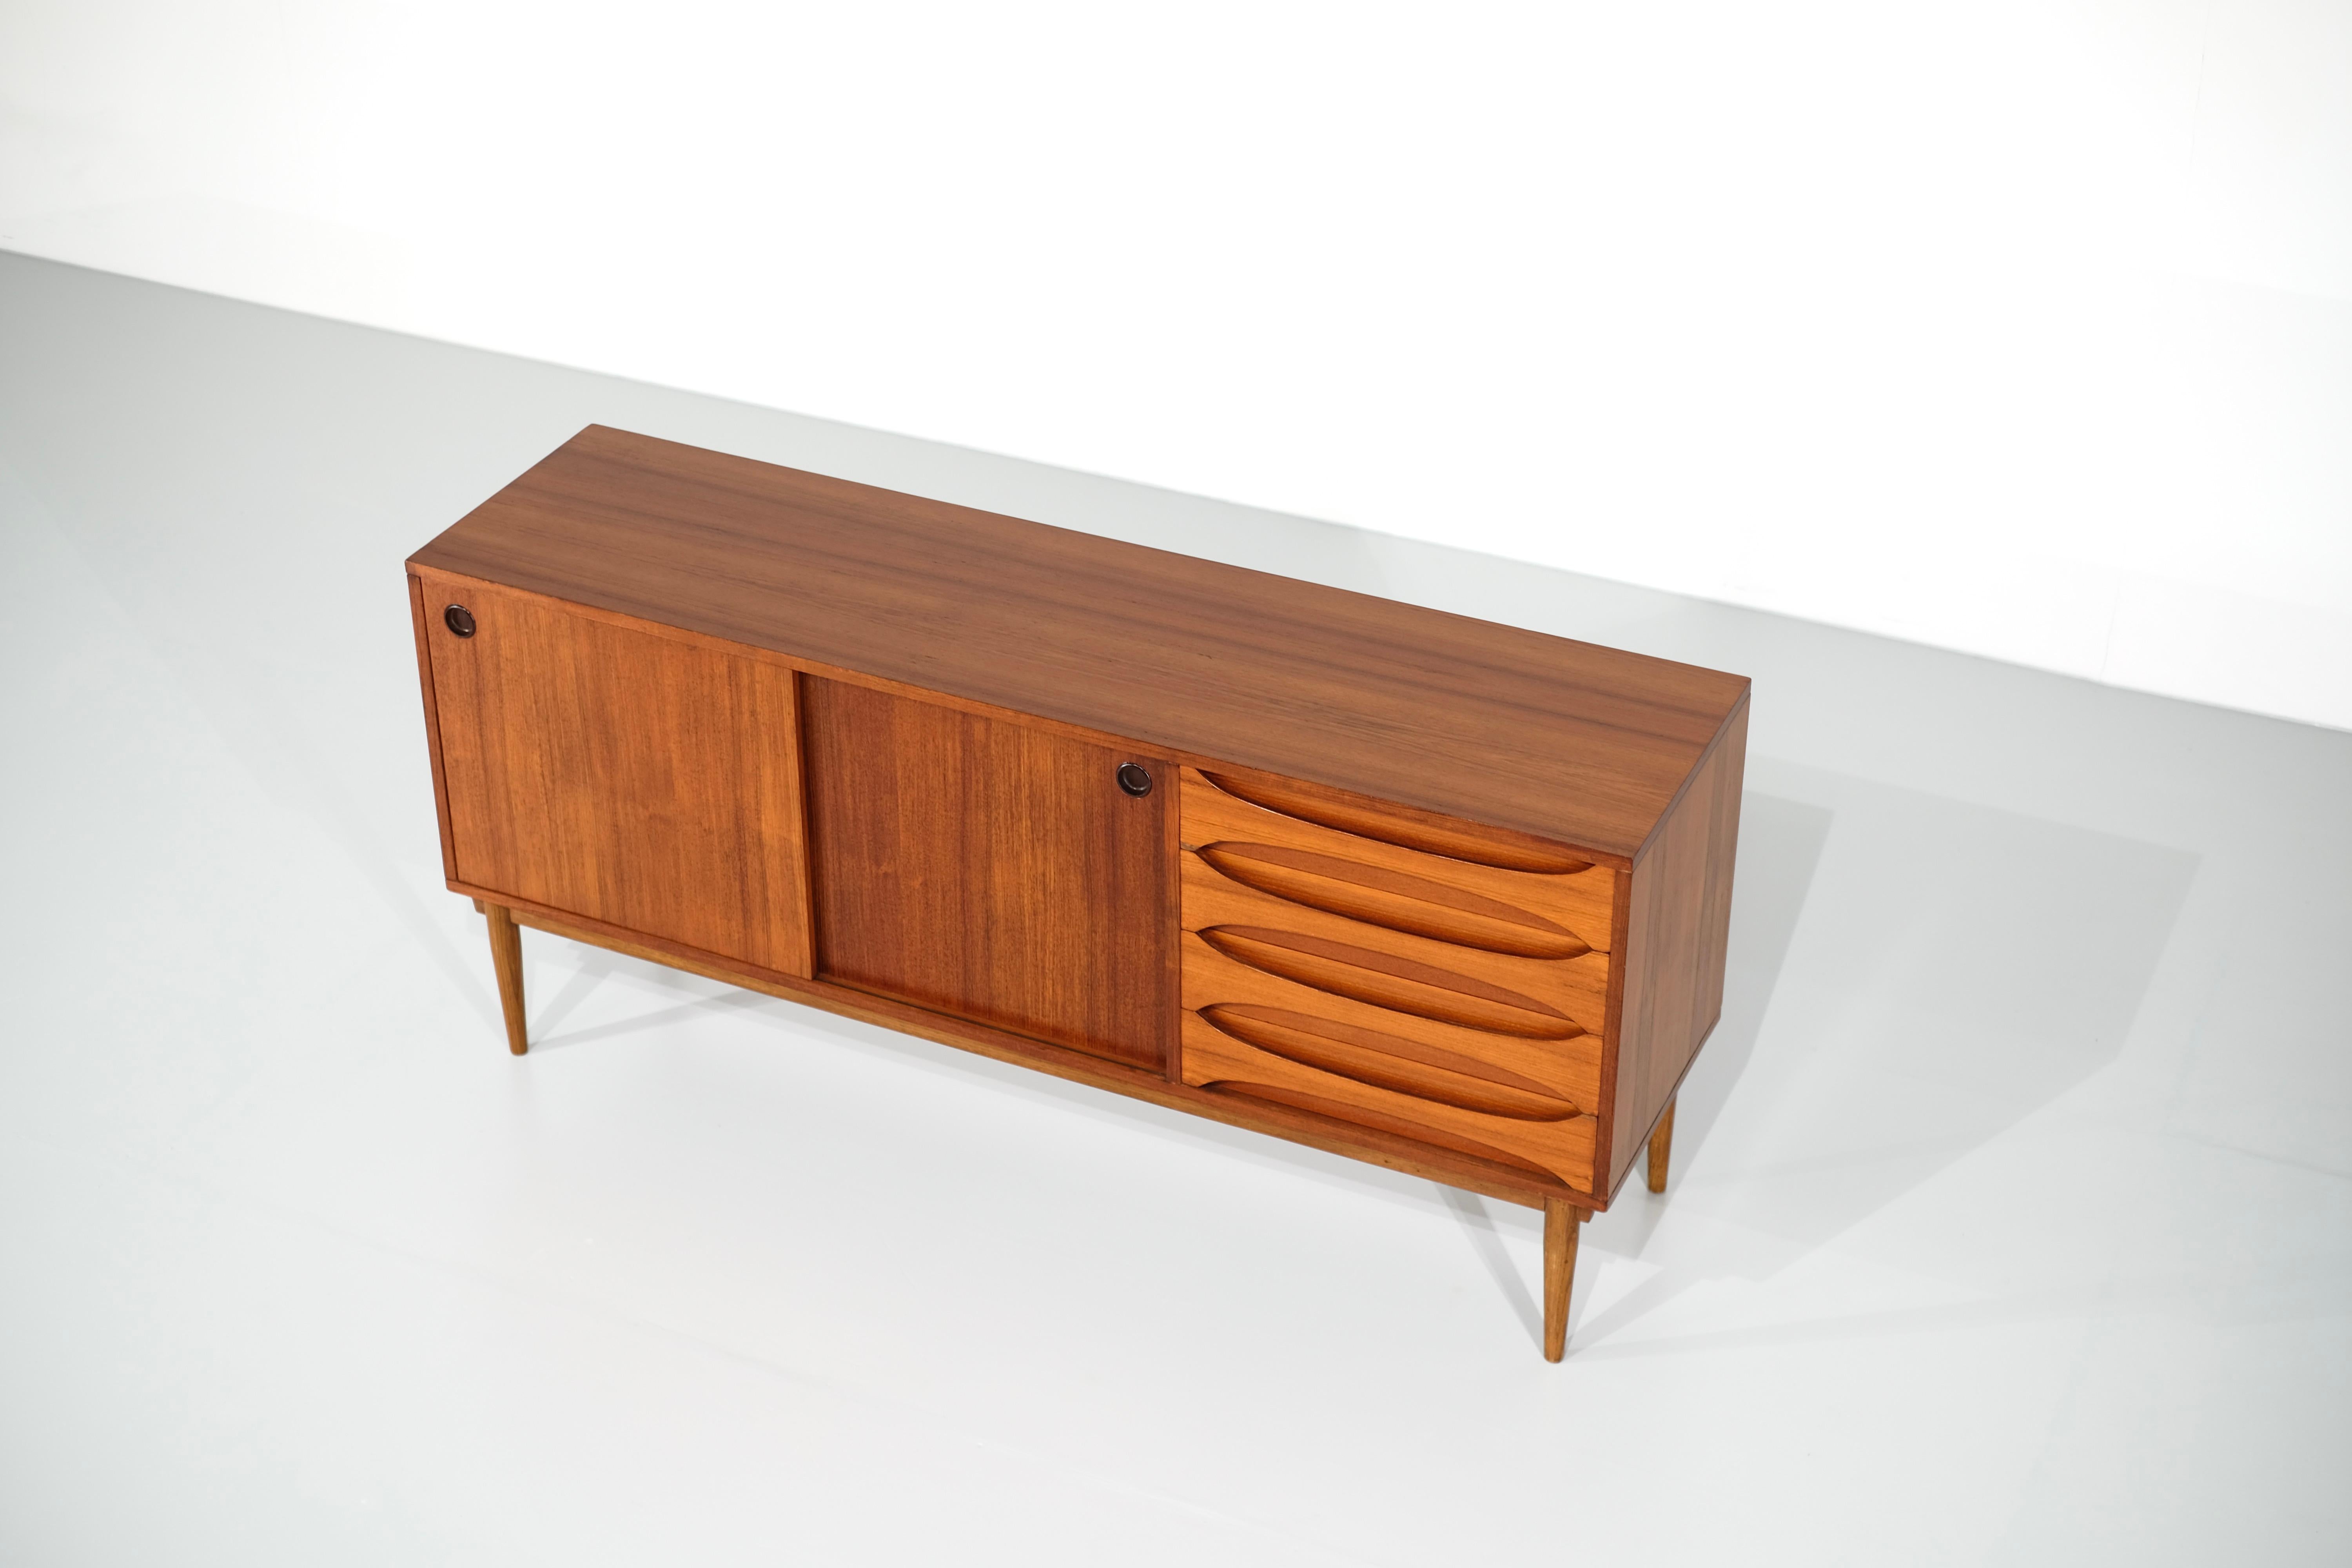  Sideboard in Wood medium size 1960's For Sale 3